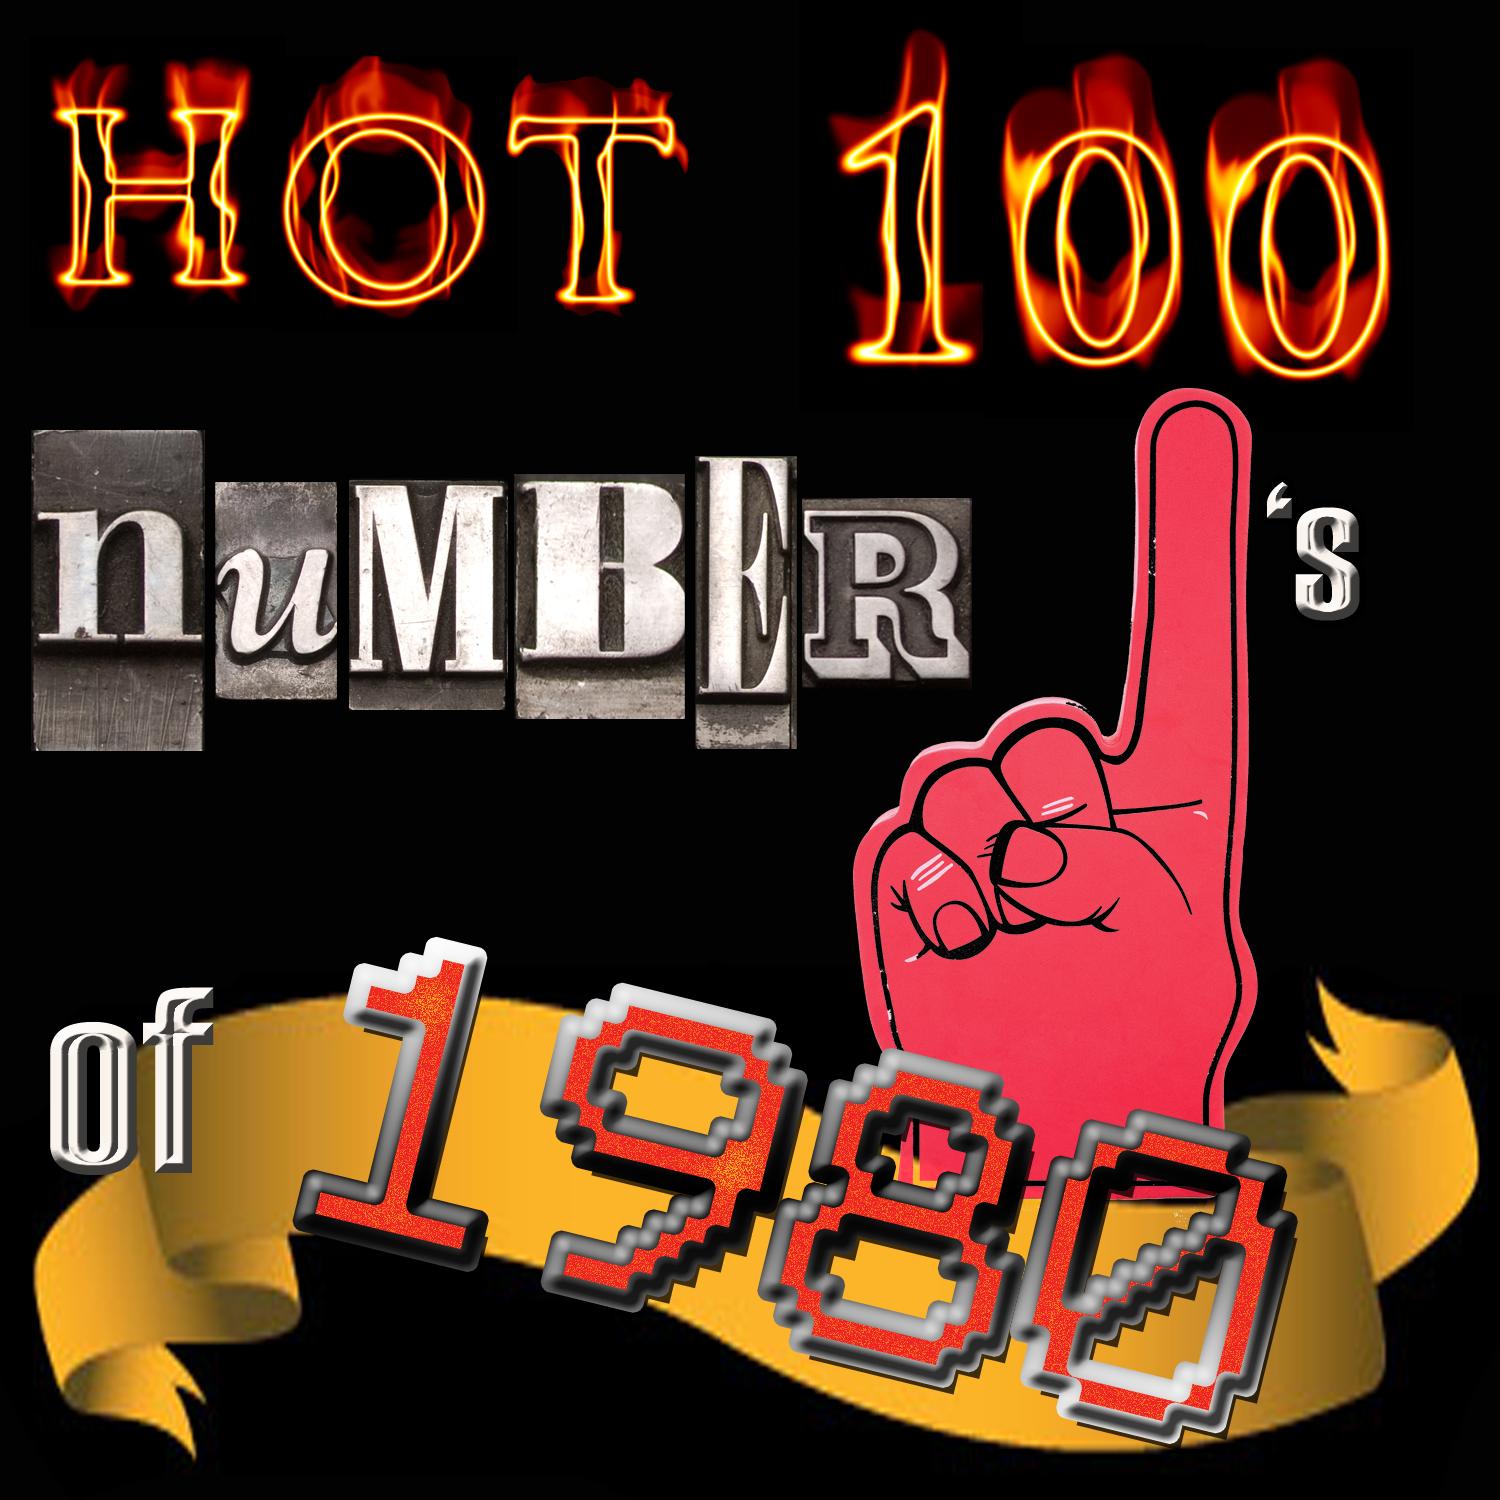 Hot 100 Number Ones Of 1980